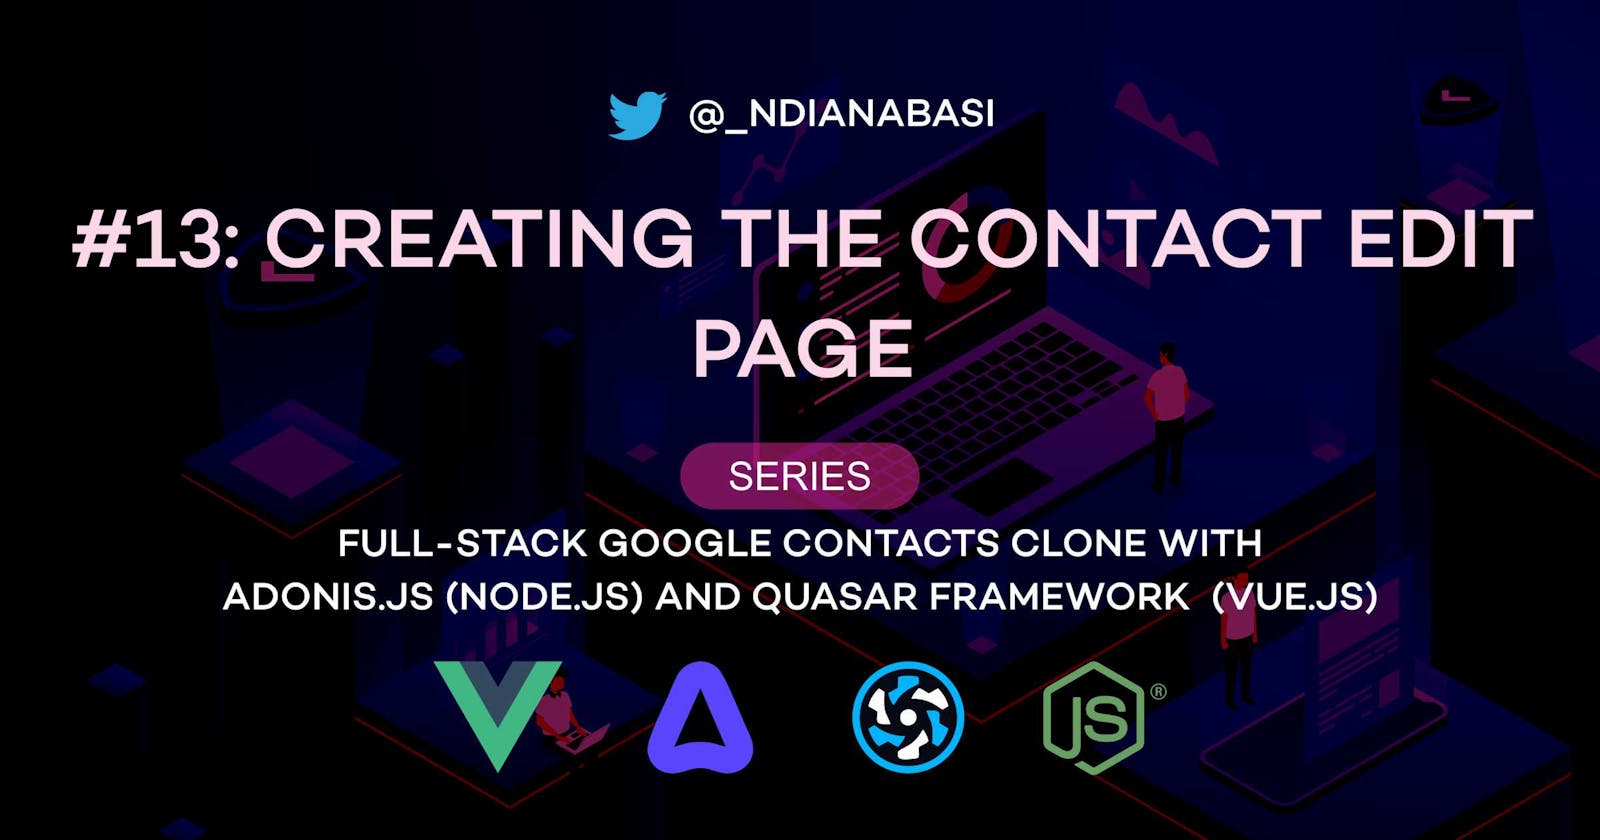 Creating the Contact Edit Page | Full-Stack Google Contacts Clone with Adonis.js/Node.js and Quasar (Vue.js)